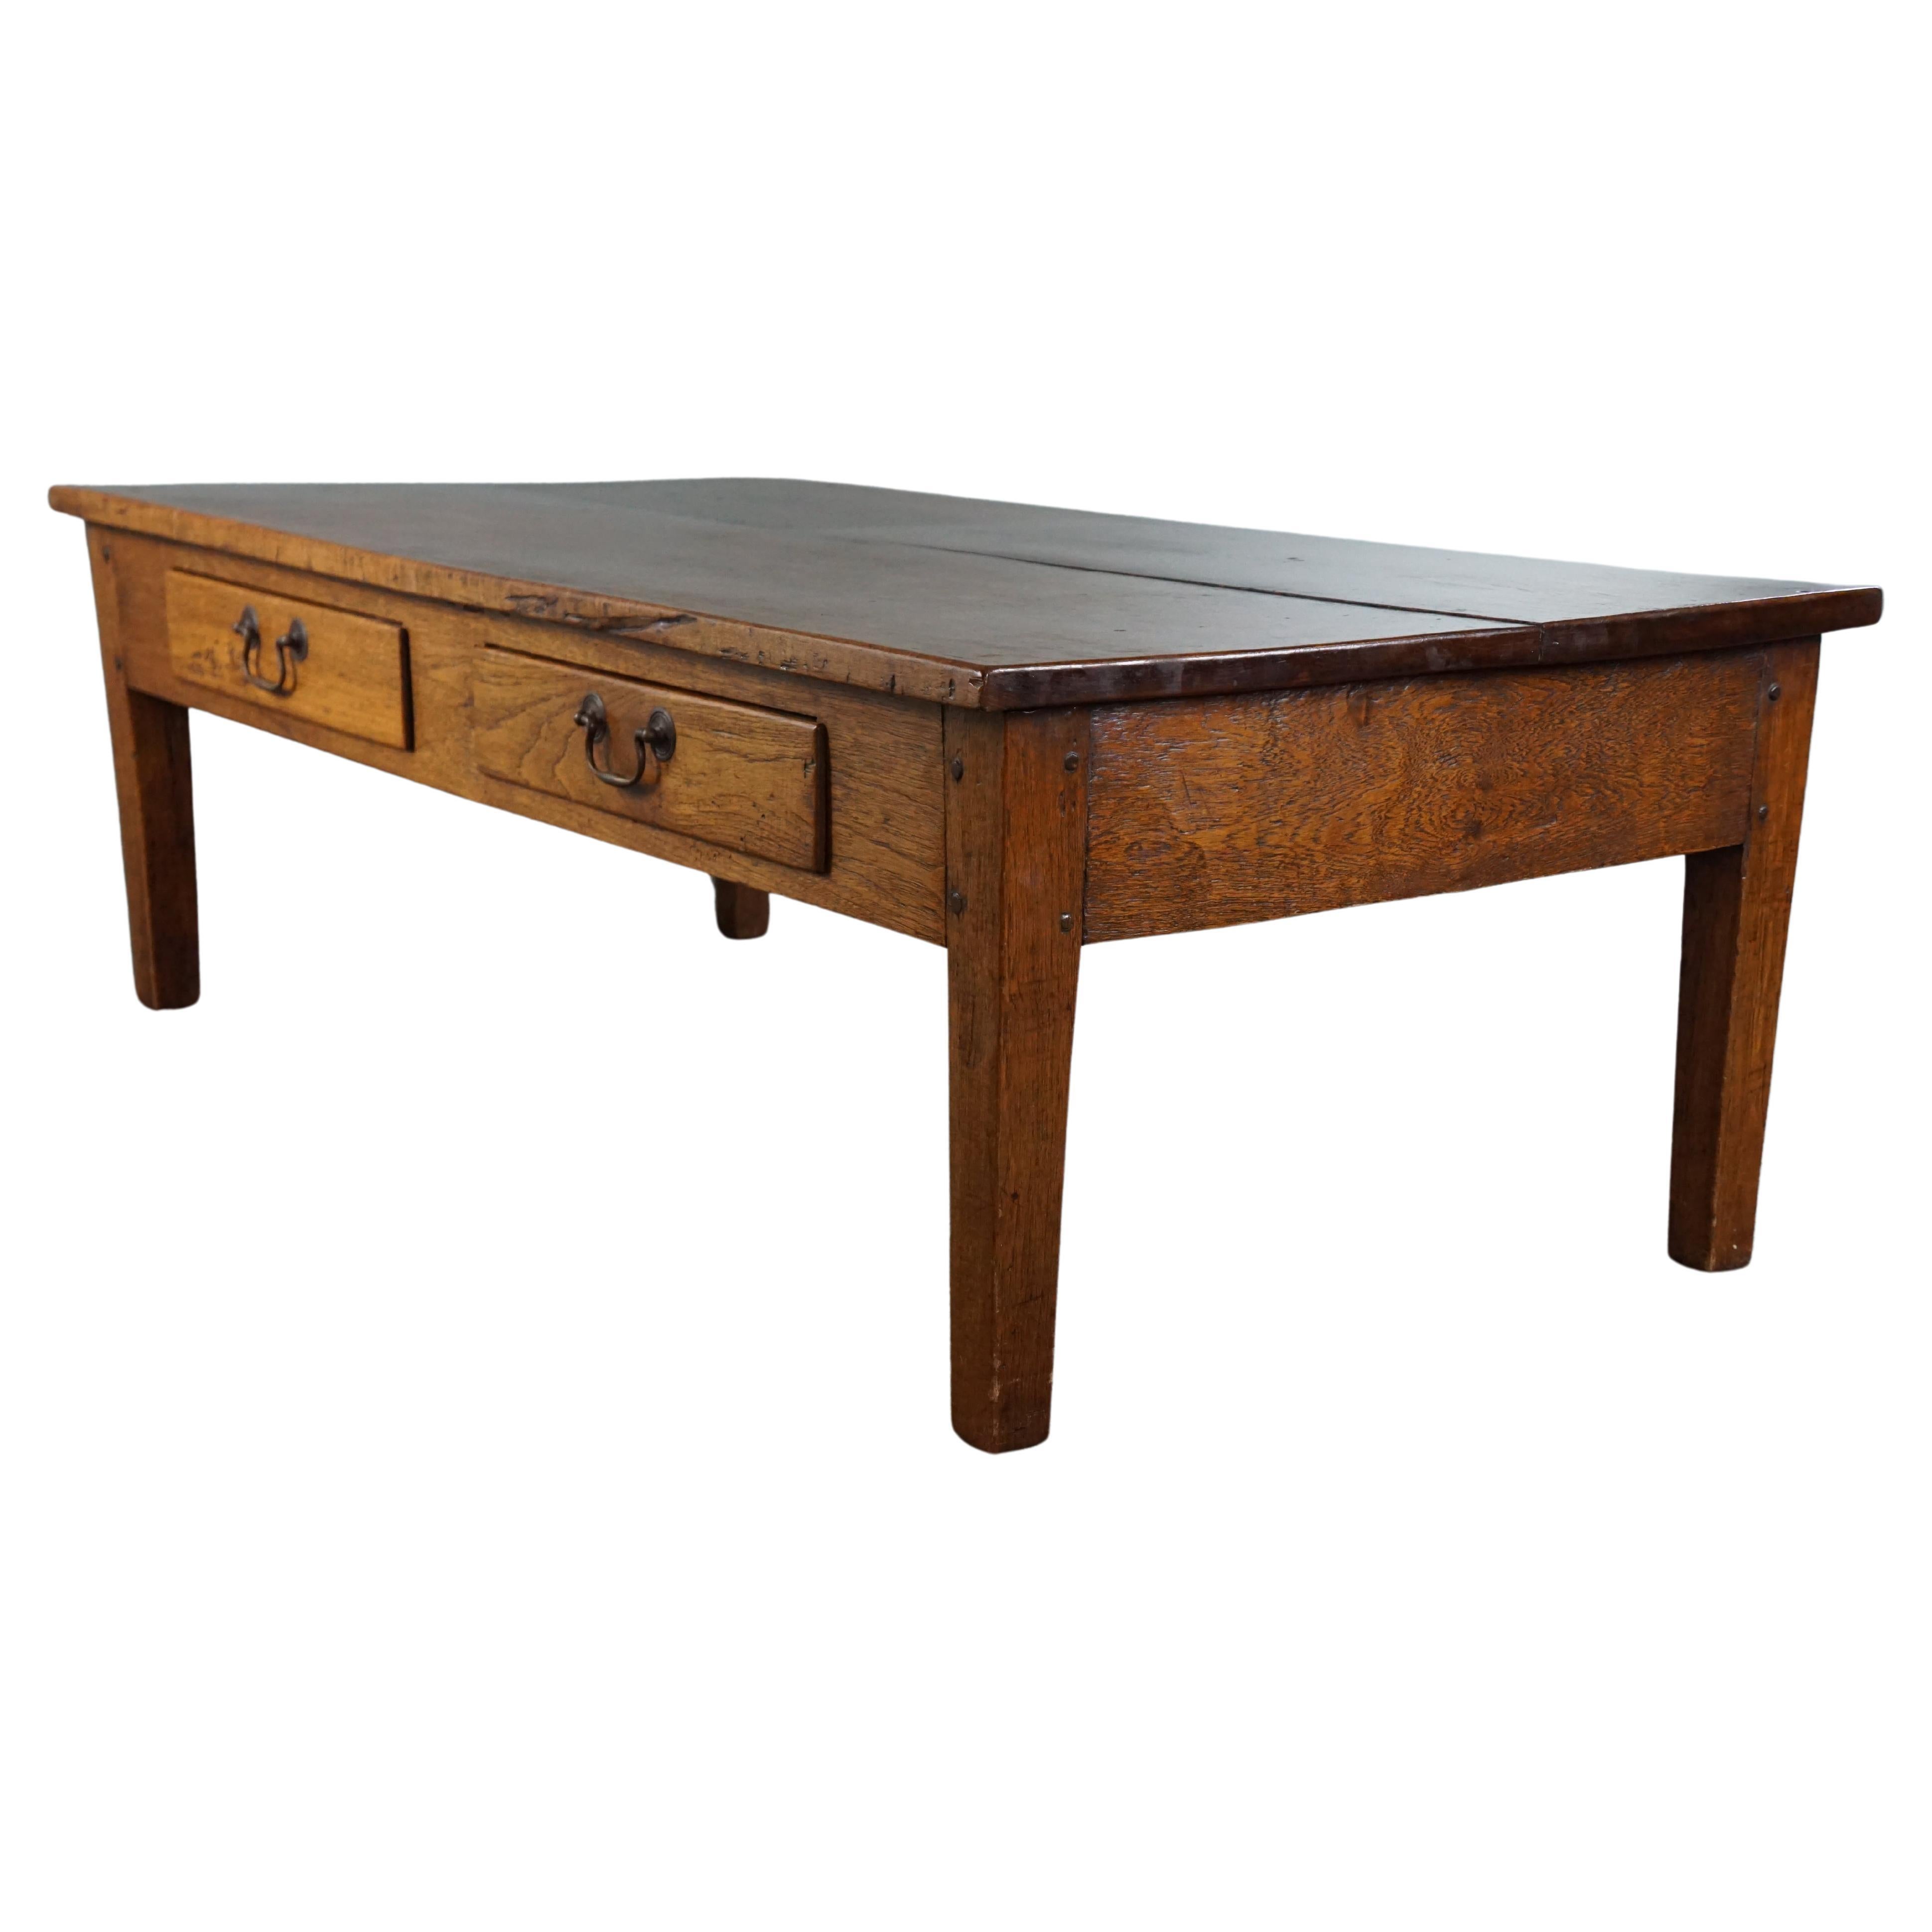 Charming and practical antique coffee table with two drawers, beautiful color